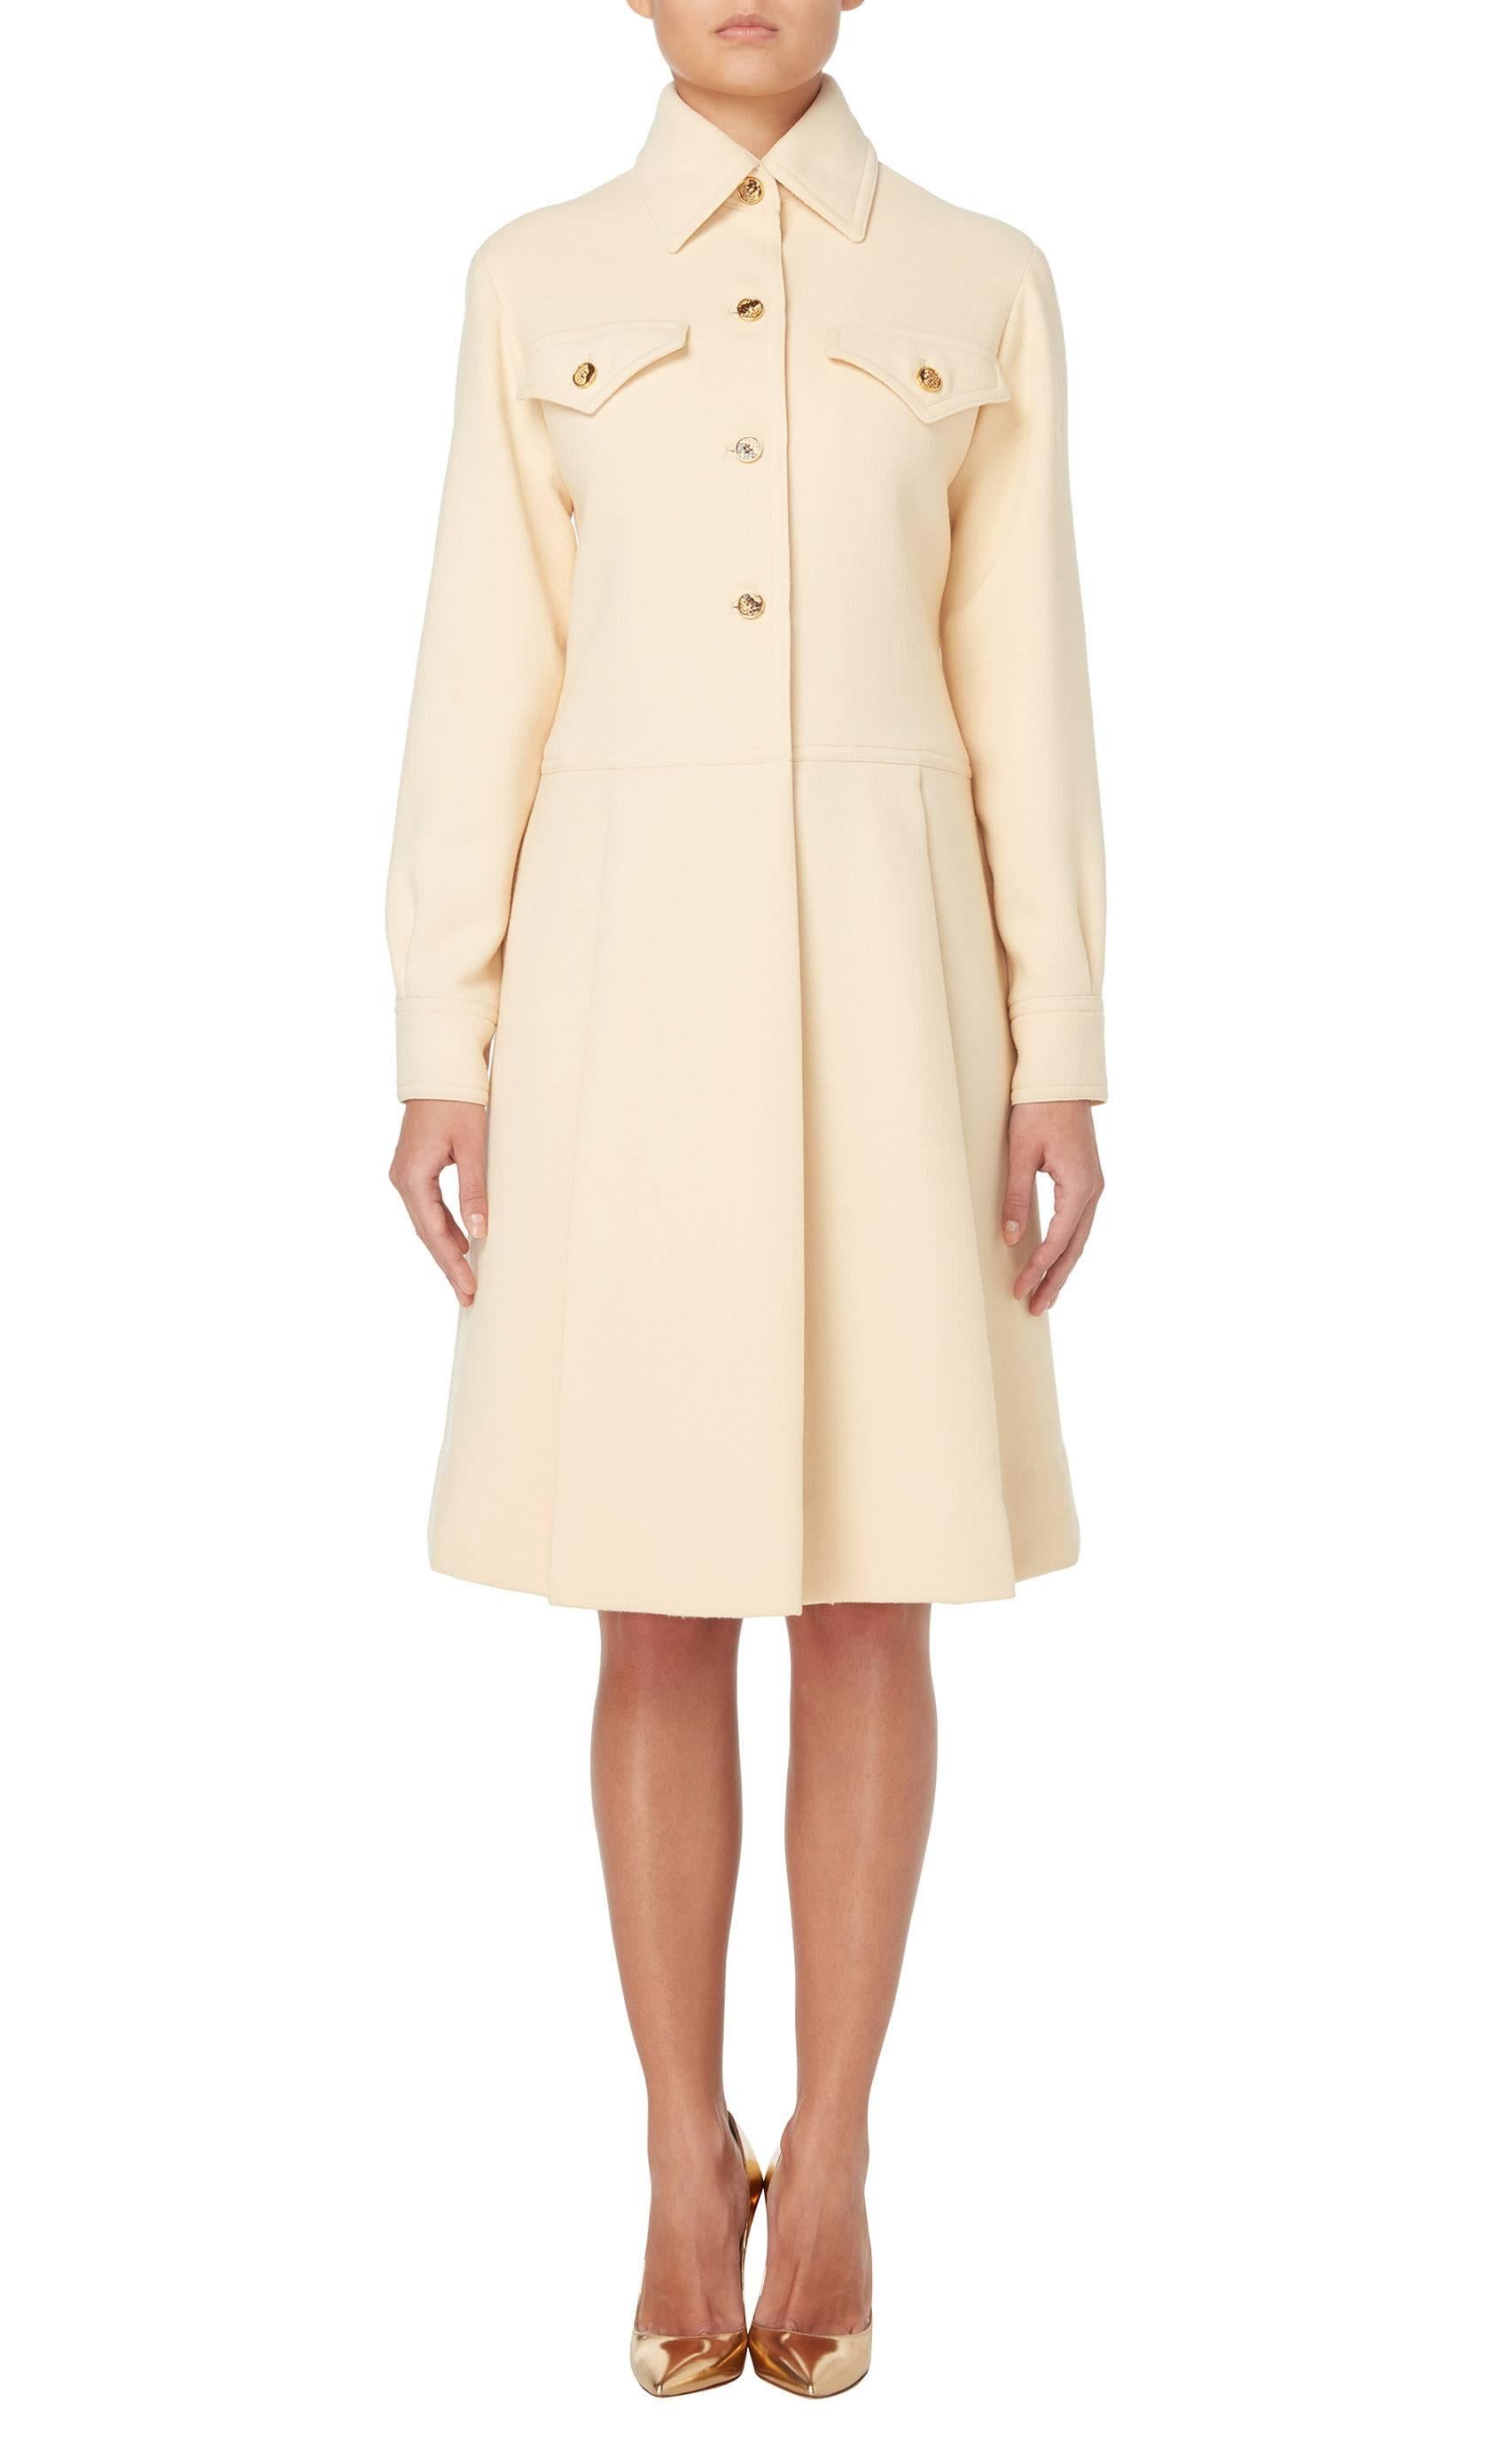 This Galanos dress would make a great option for the office. Constructed in ivory wool, the dress gives the illusion of being a coat, with a single lapel collar and snakeskin effect buttons fastening to the front, chest pockets and cuffs. The